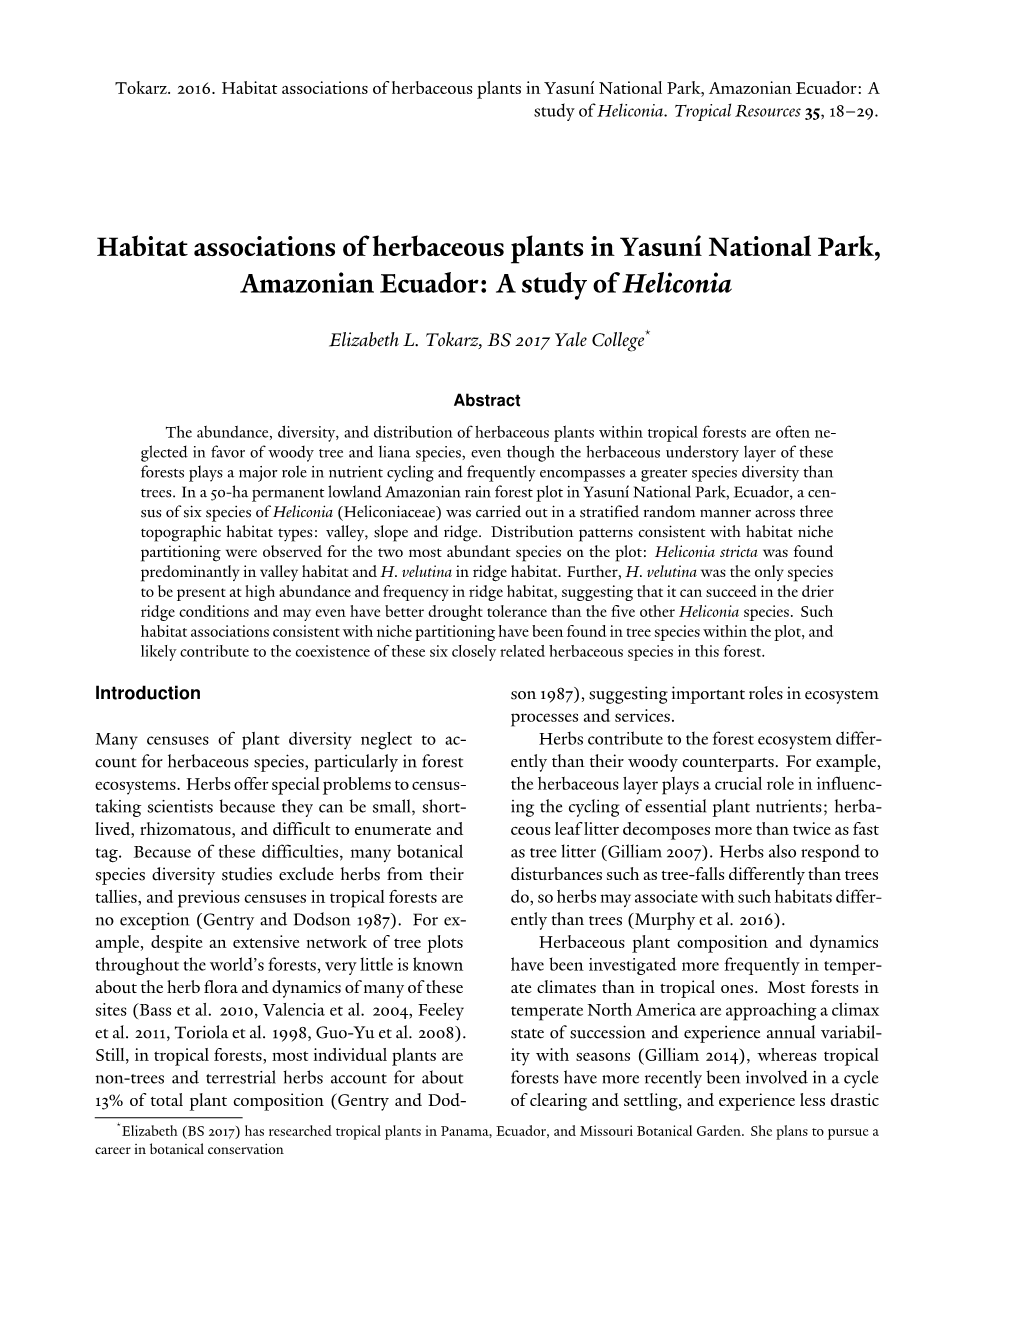 Habitat Associations of Herbaceous Plants in Yasuní National Park, Amazonian Ecuador: a Study of Heliconia